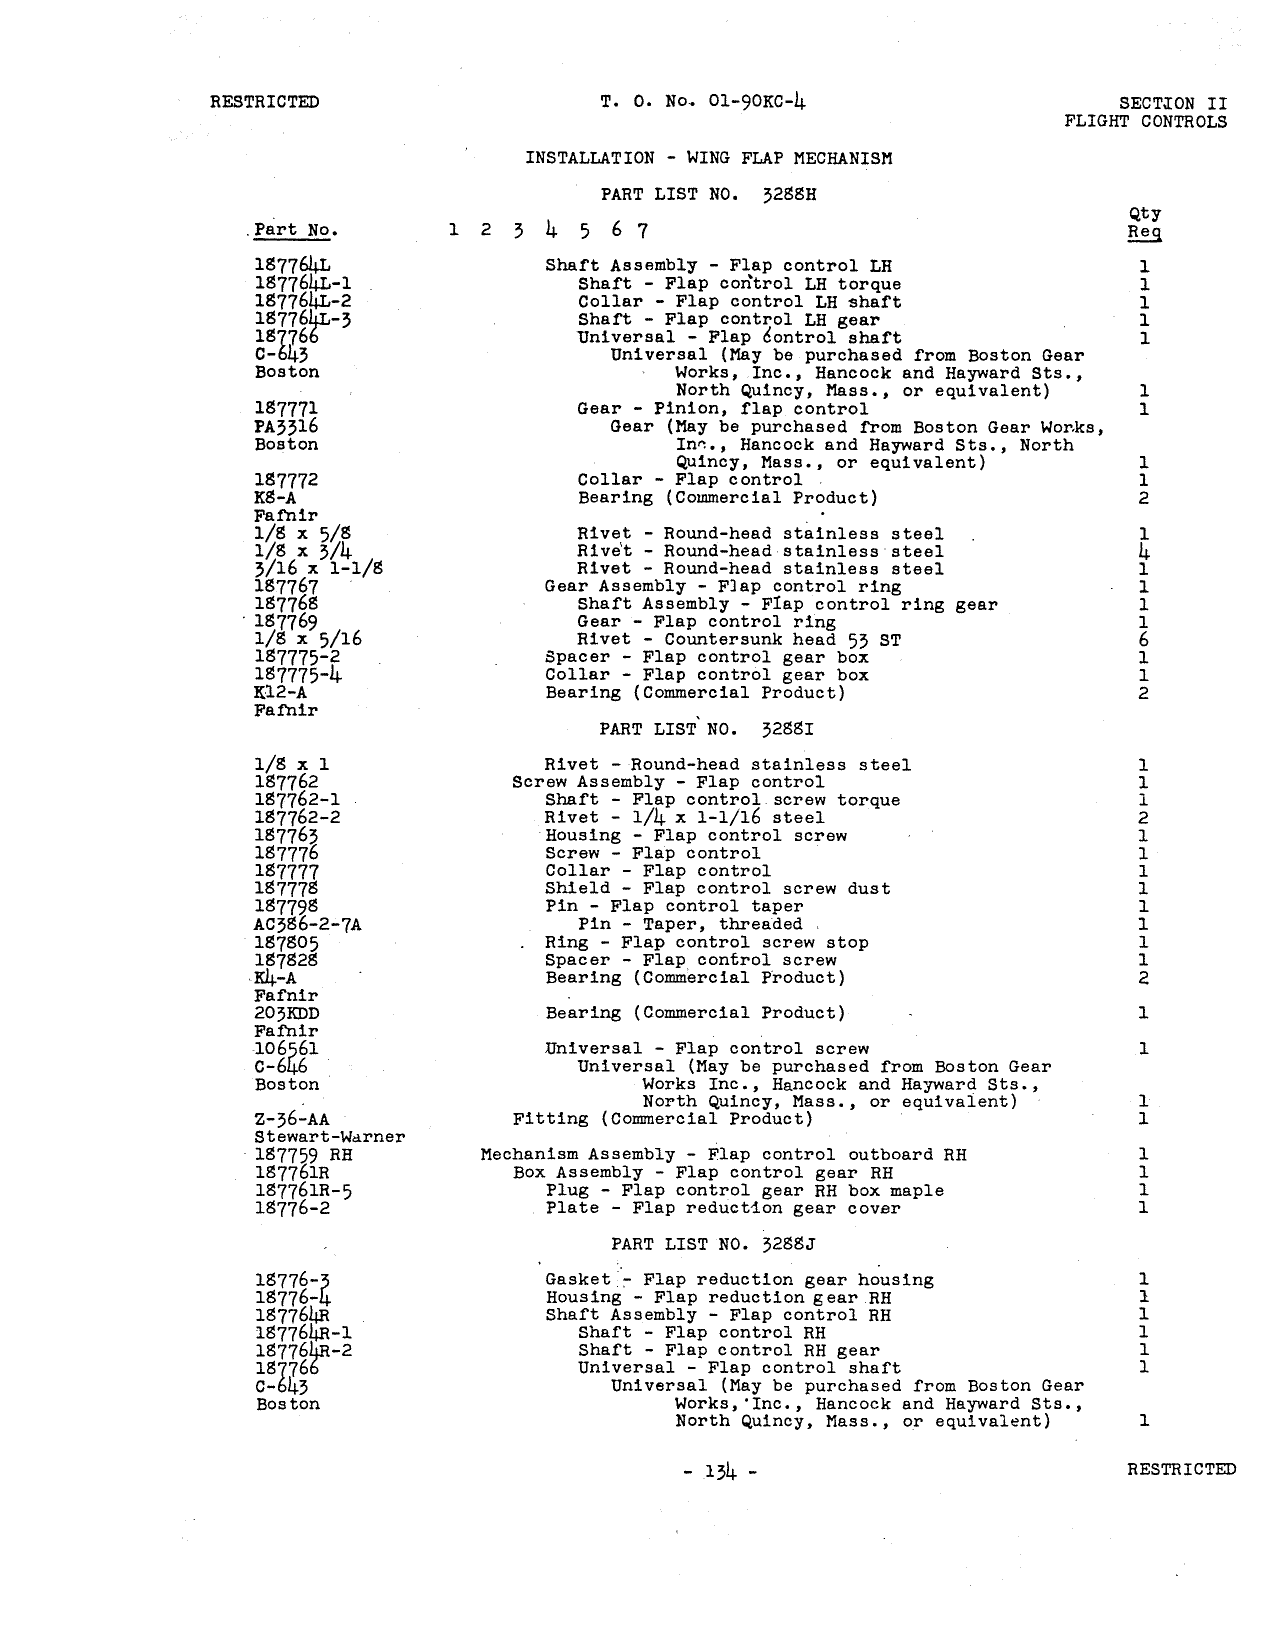 Sample page 139 from AirCorps Library document: Parts Catalog - AT-11